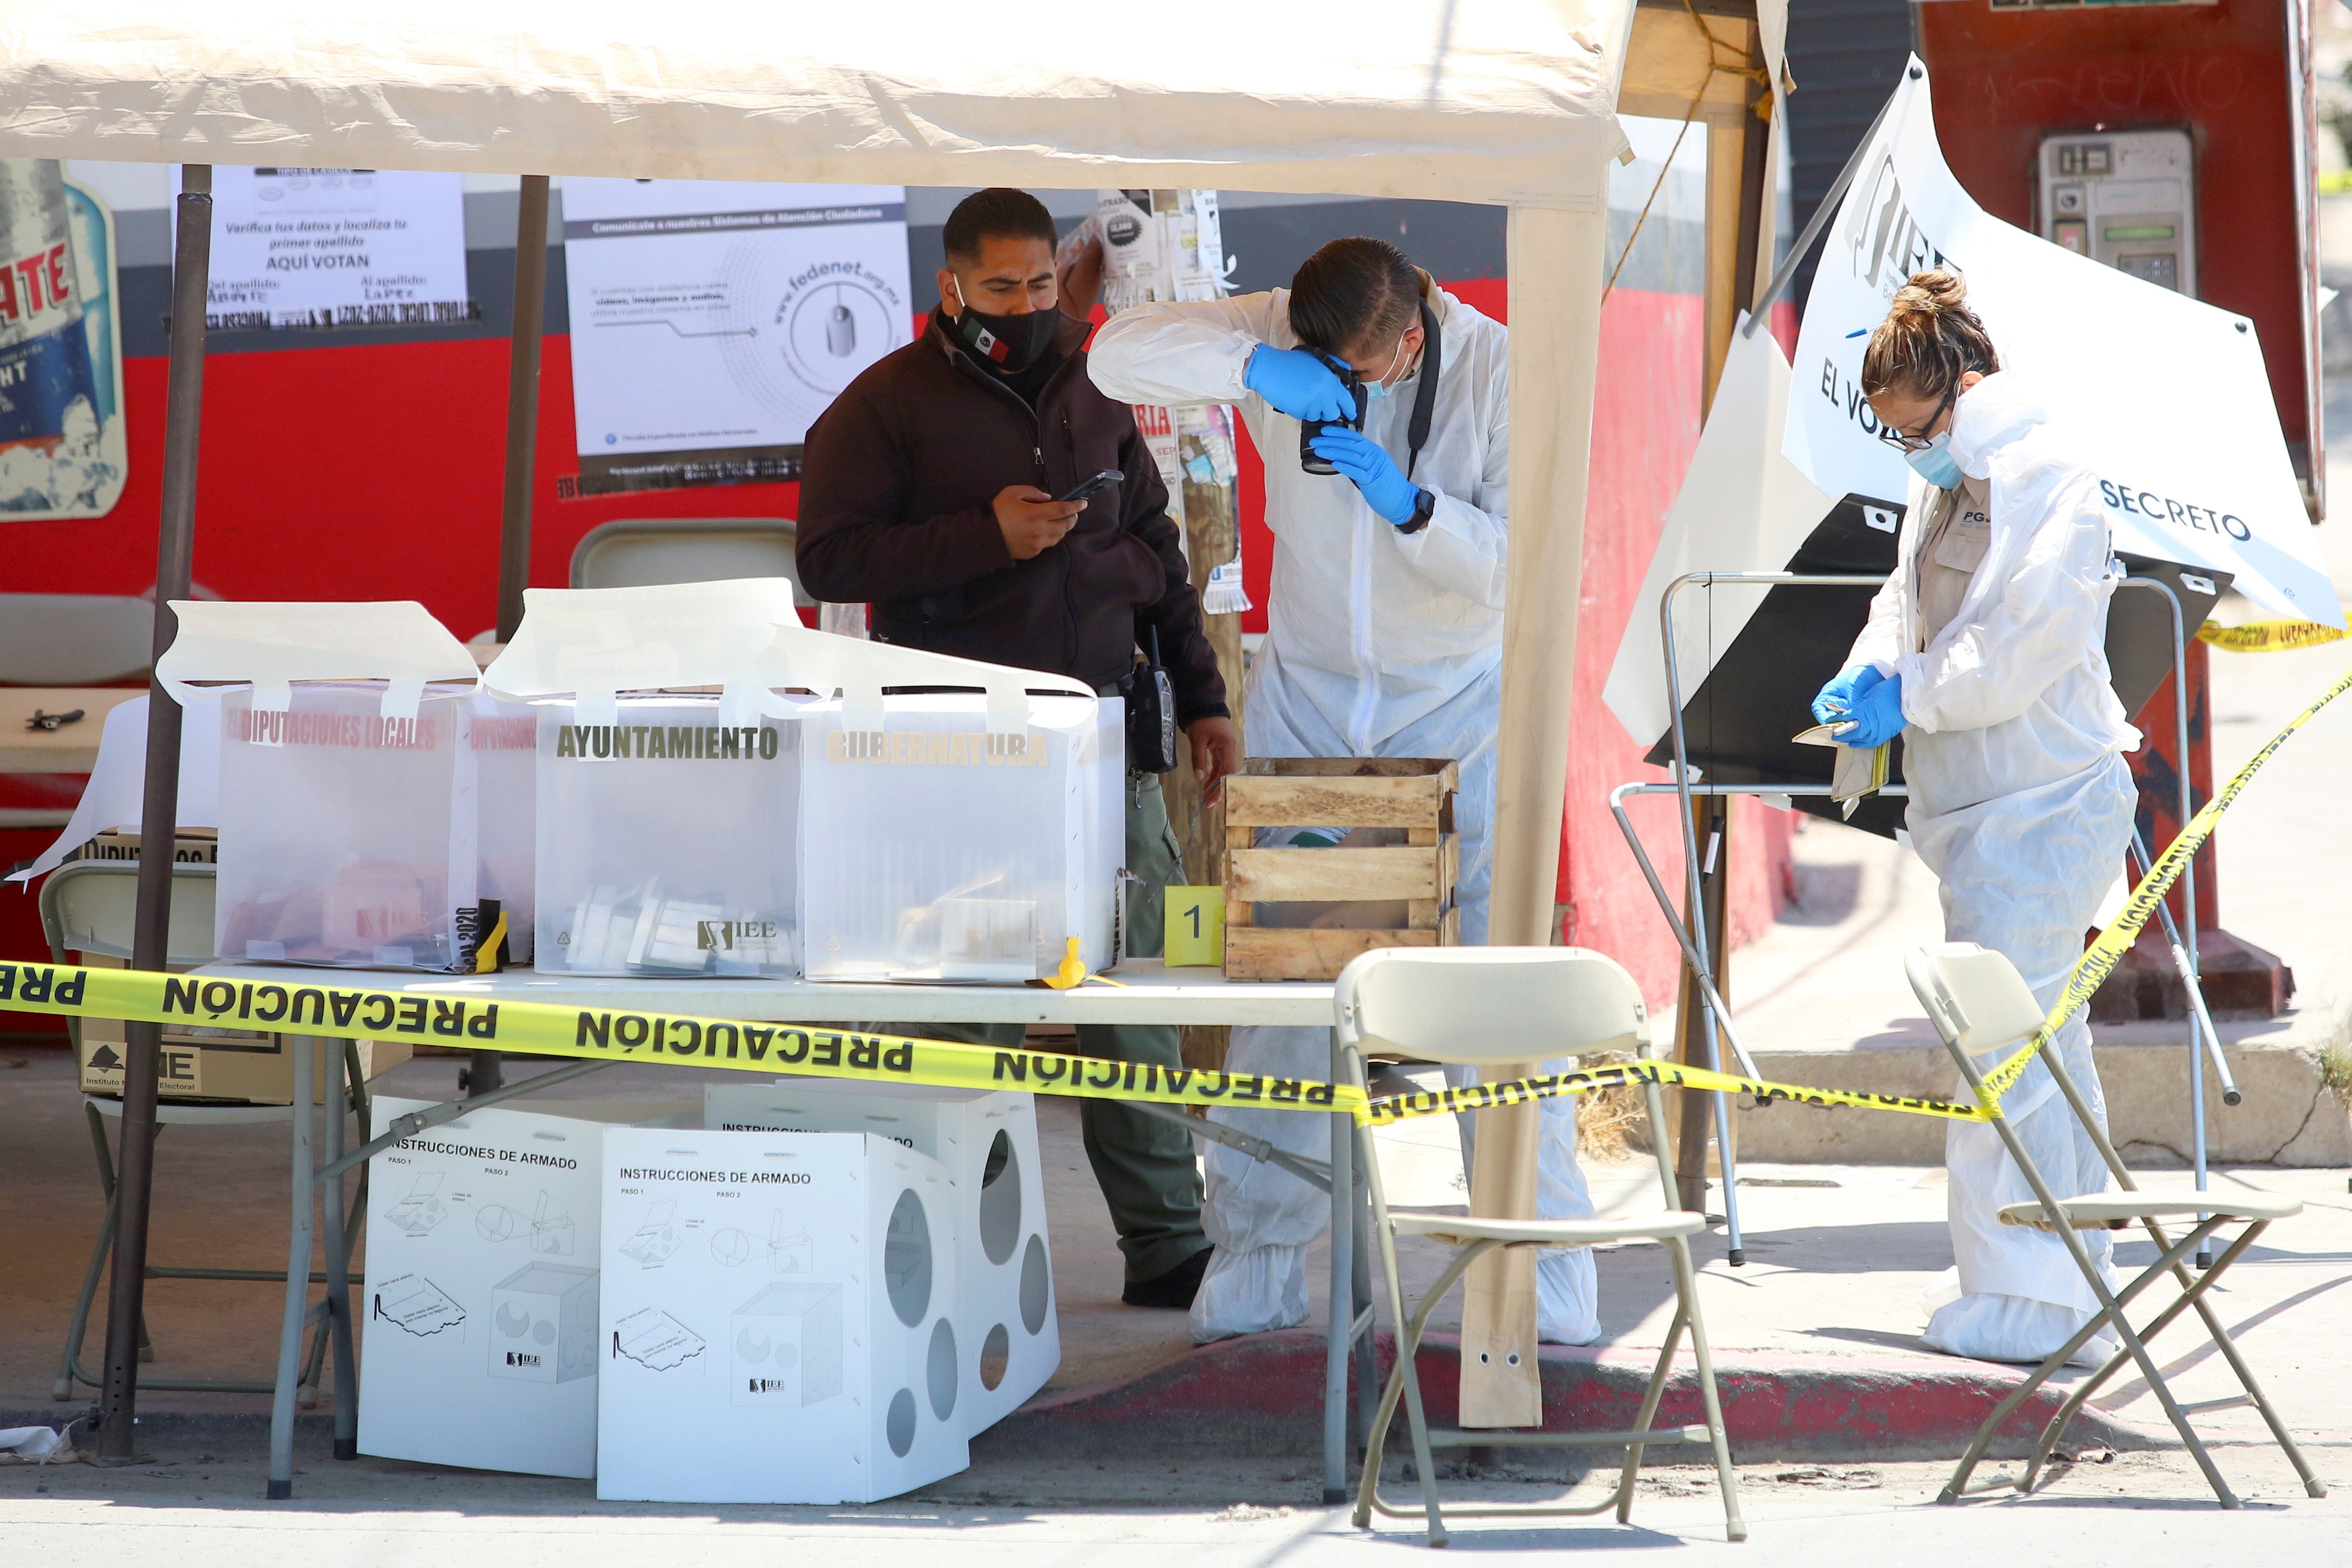 Forensic technicians work at a scene in a polling station where a man threw a severed human head, during the mid-term elections in Tijuana, Mexico